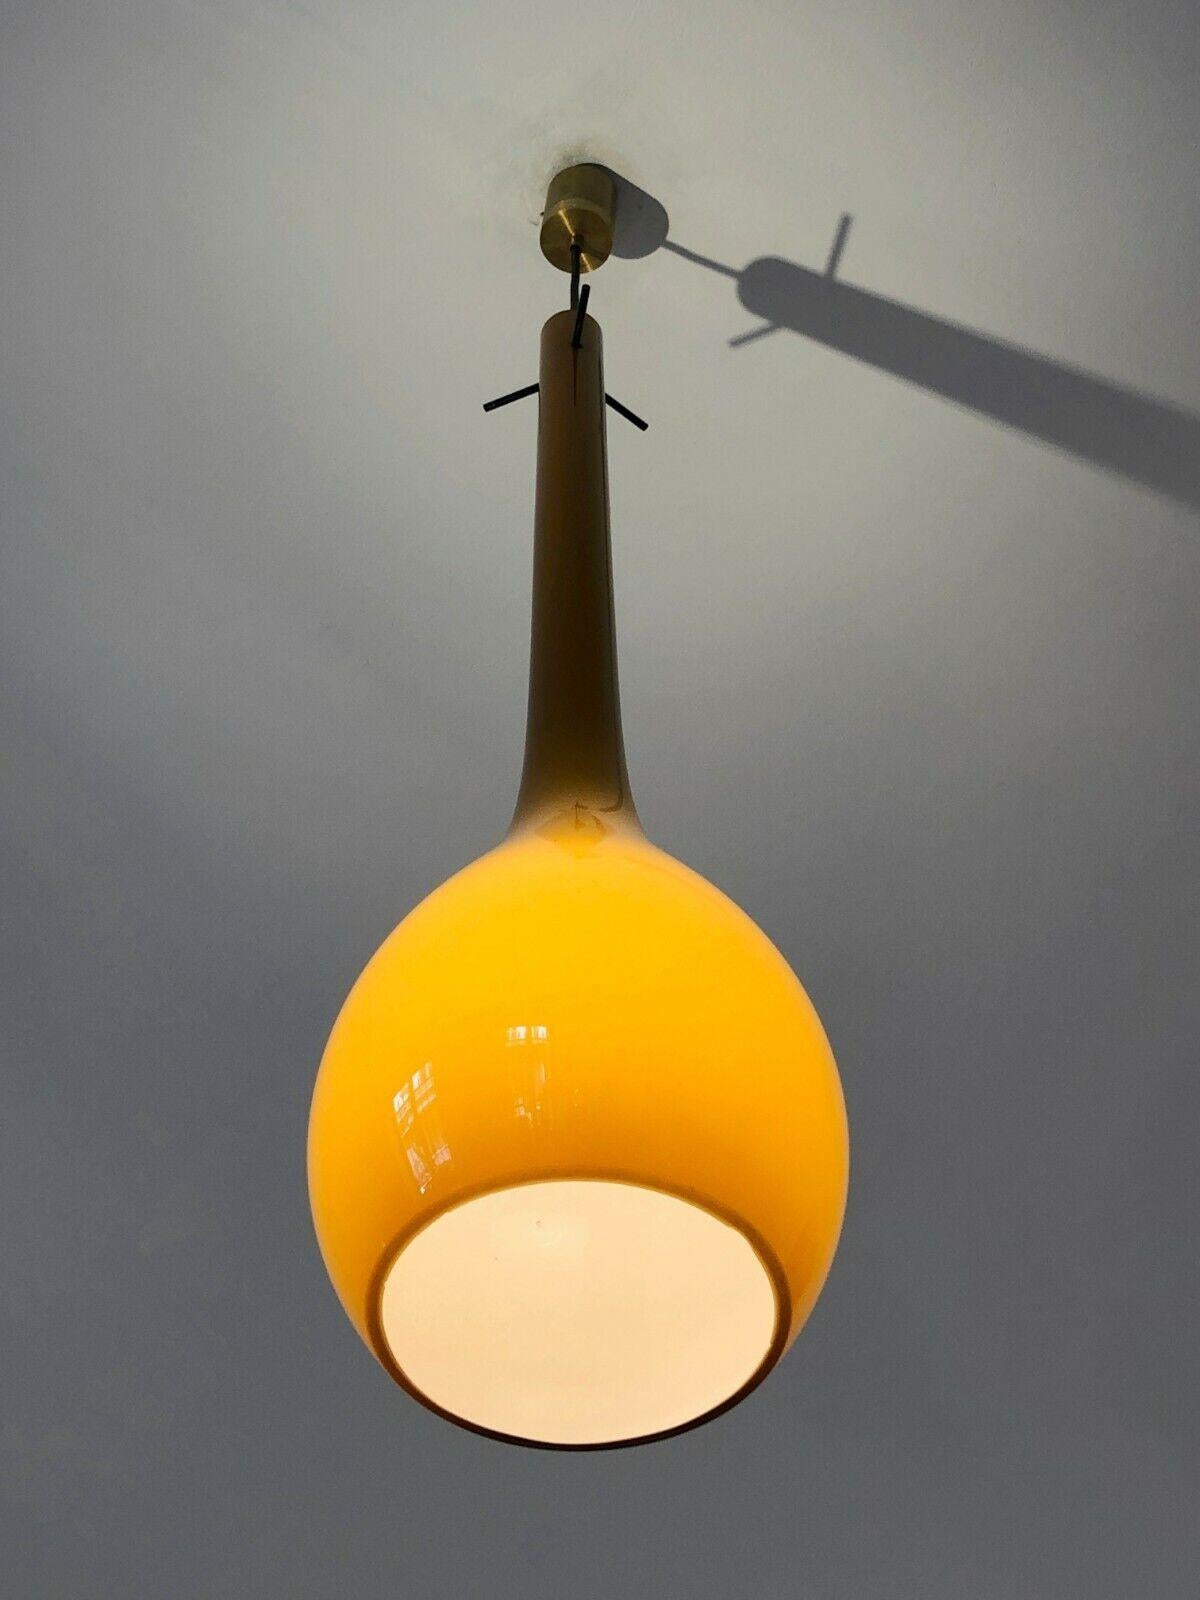 An exceptional ceiling light in the form of a long drop or tear, Moderniste, Forme-Libre, Mid-century Modern, a subtle design executed in Murano ocher glass, fixed with two cylinders in patina brass; to be attributed, Murano, Italy 1960.